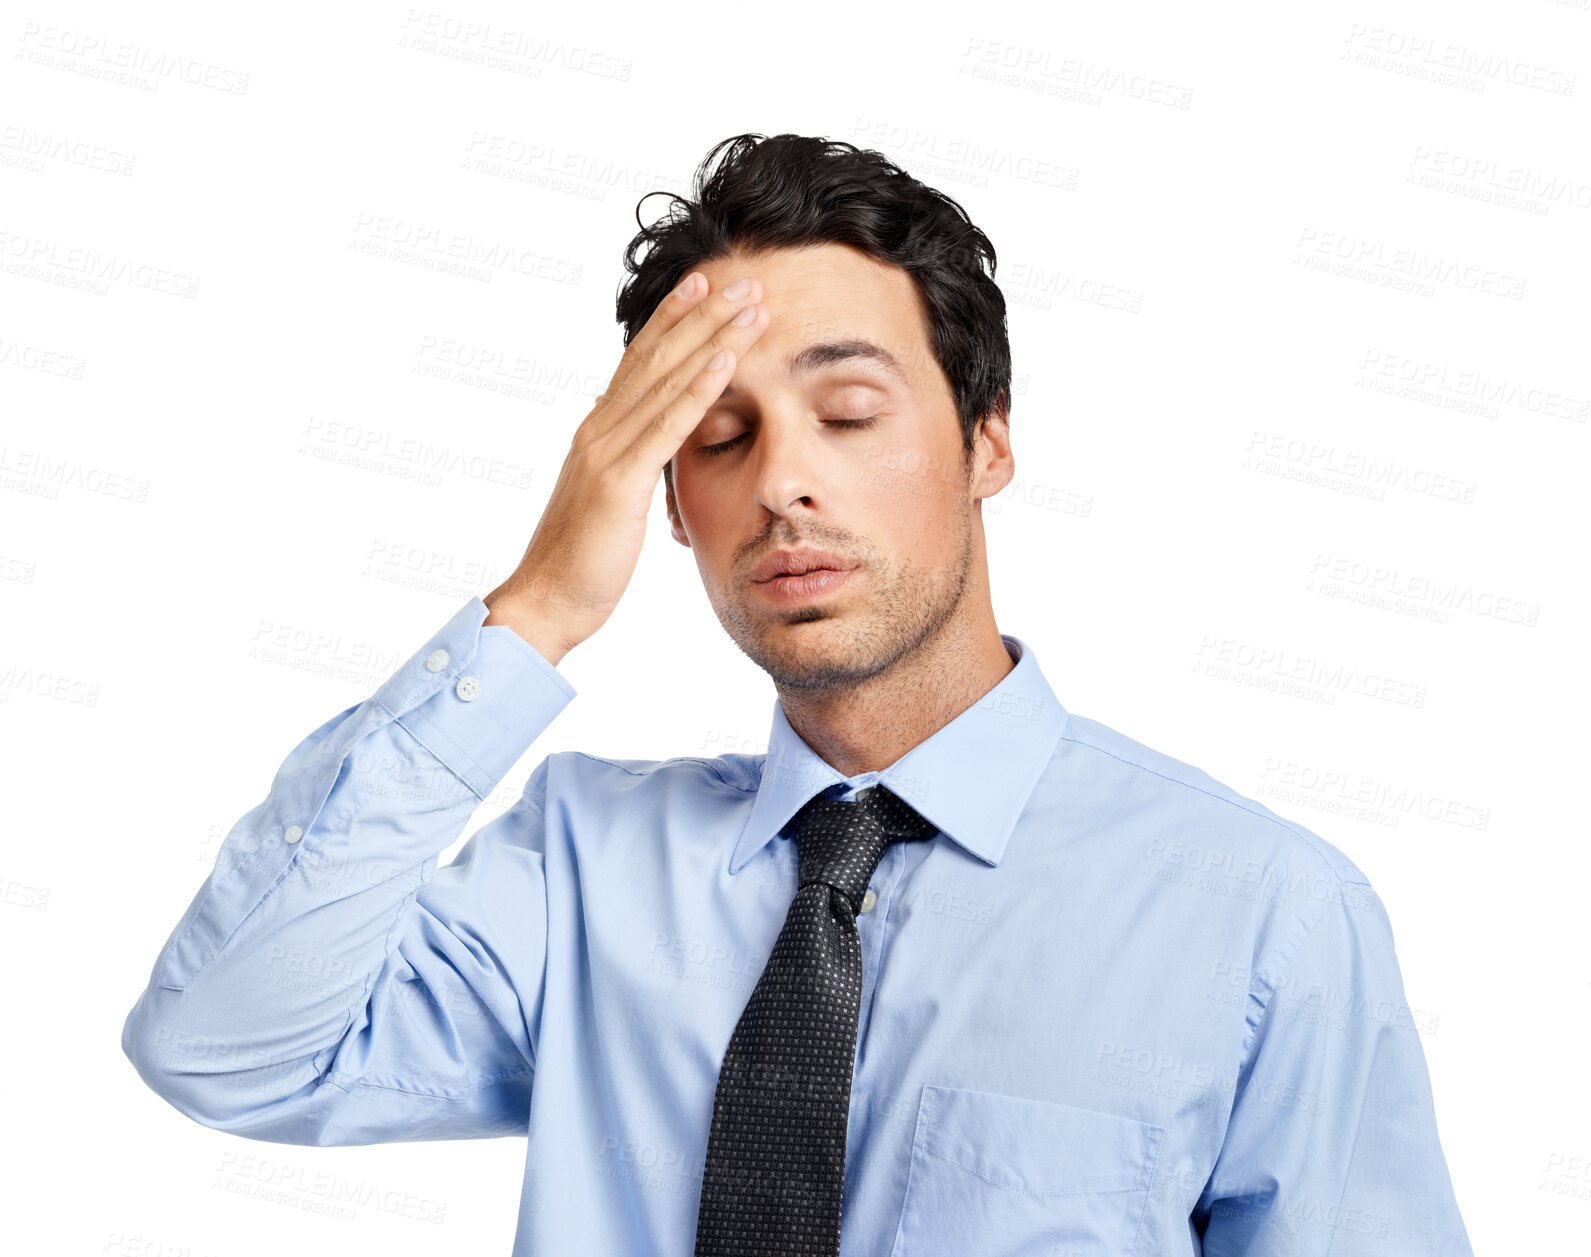 Buy stock photo Headache, confused and business man with stress, worry or career problem of financial mistake, crisis or taxes. Pain, tired and corporate person in finance risk isolated on transparent png background